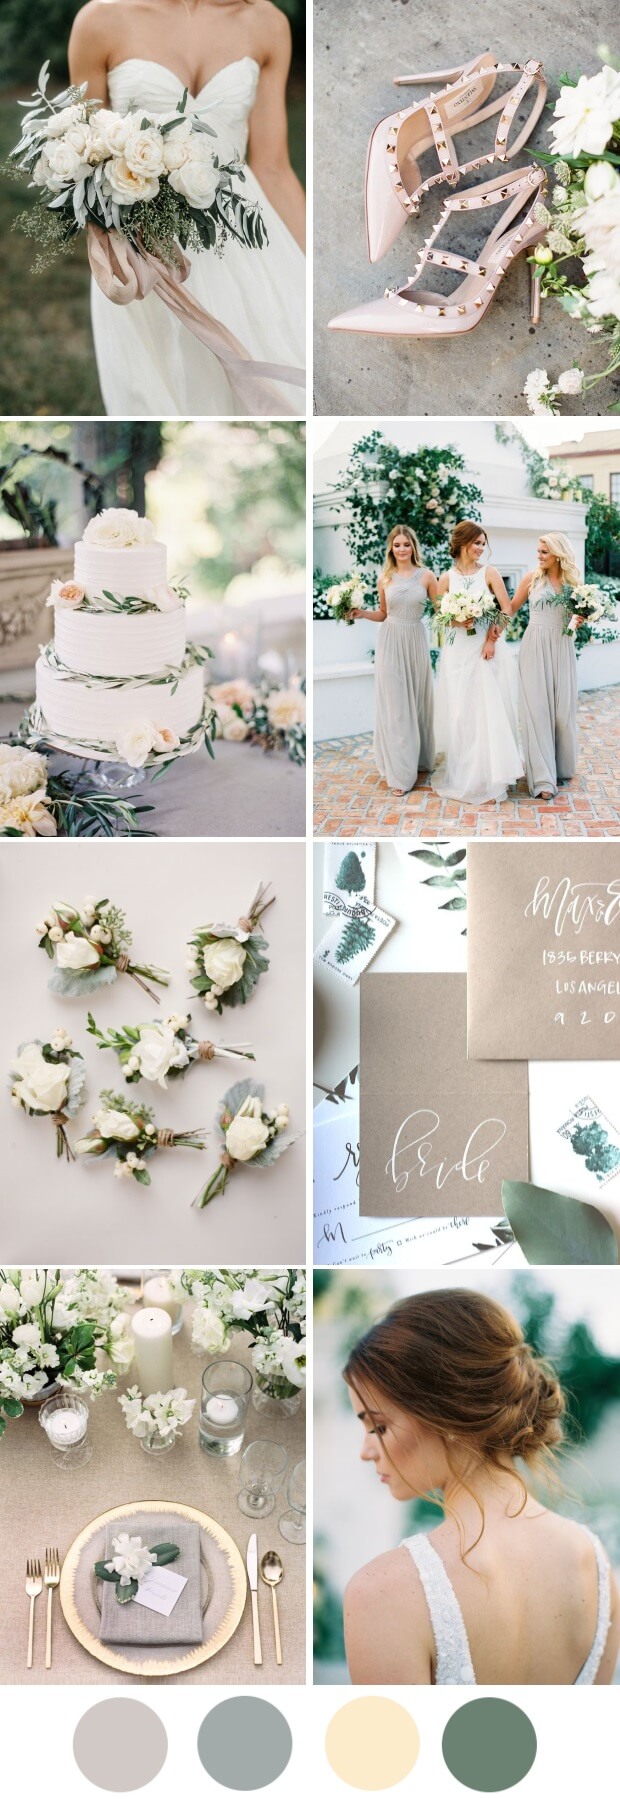 neutral-wedding-palette-colours-greenery-mrs2be